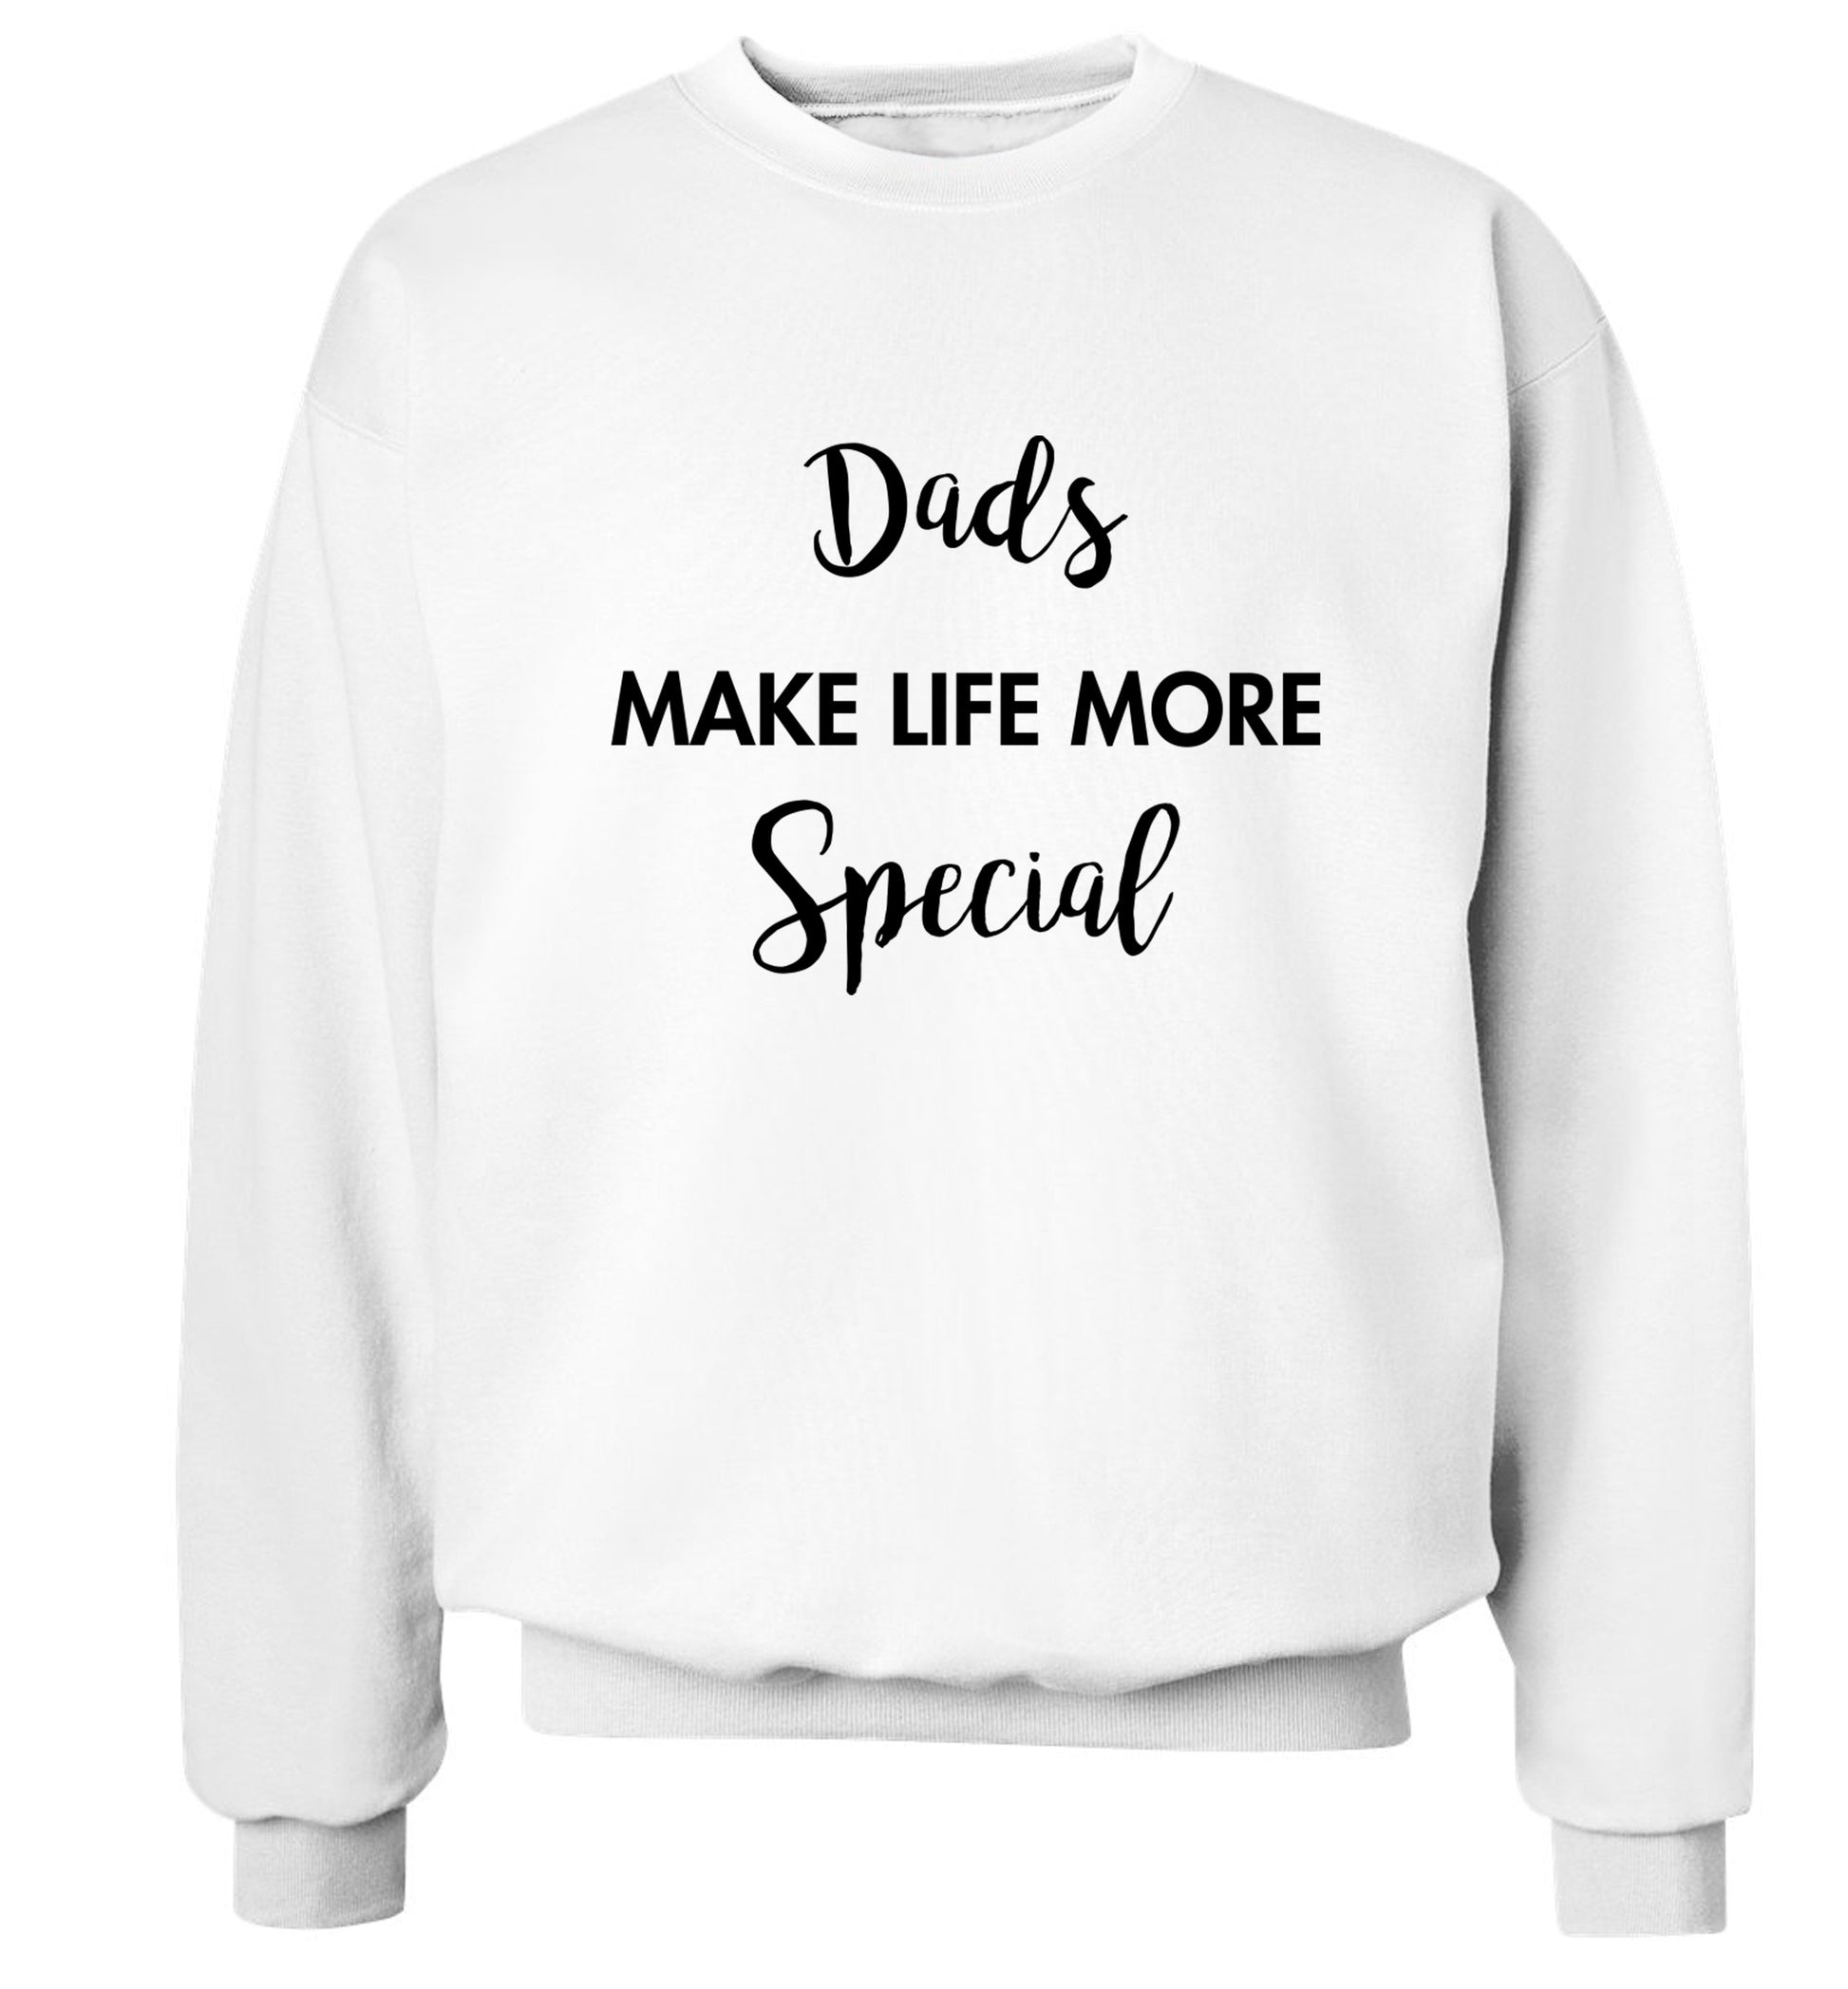 Dads make life more special Adult's unisex white Sweater 2XL